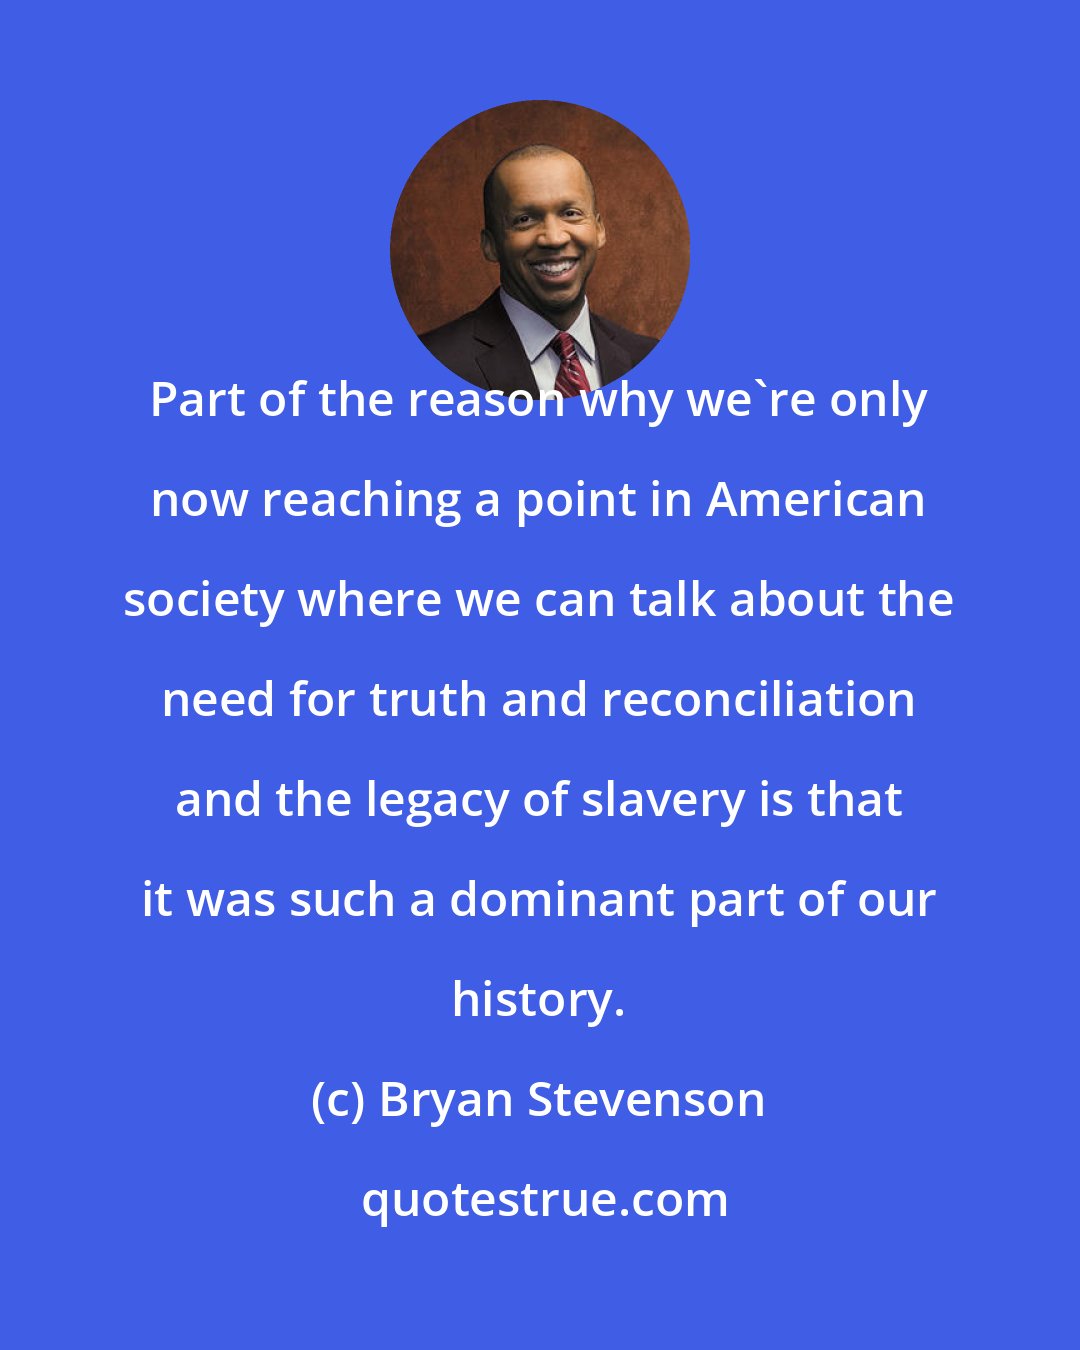 Bryan Stevenson: Part of the reason why we're only now reaching a point in American society where we can talk about the need for truth and reconciliation and the legacy of slavery is that it was such a dominant part of our history.